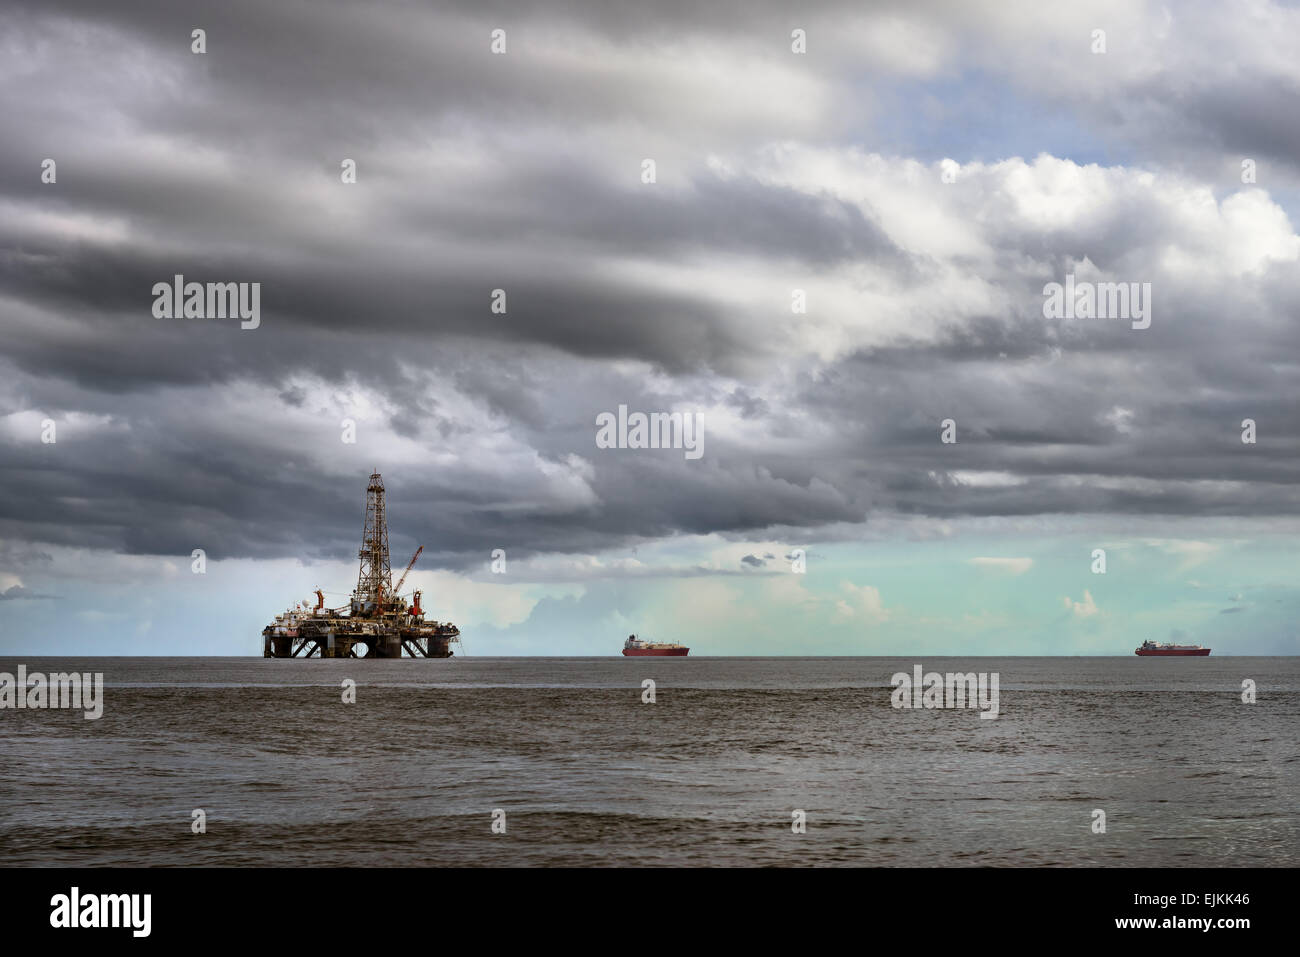 Offshore oil rig platform at sea petroleum industry Stock Photo